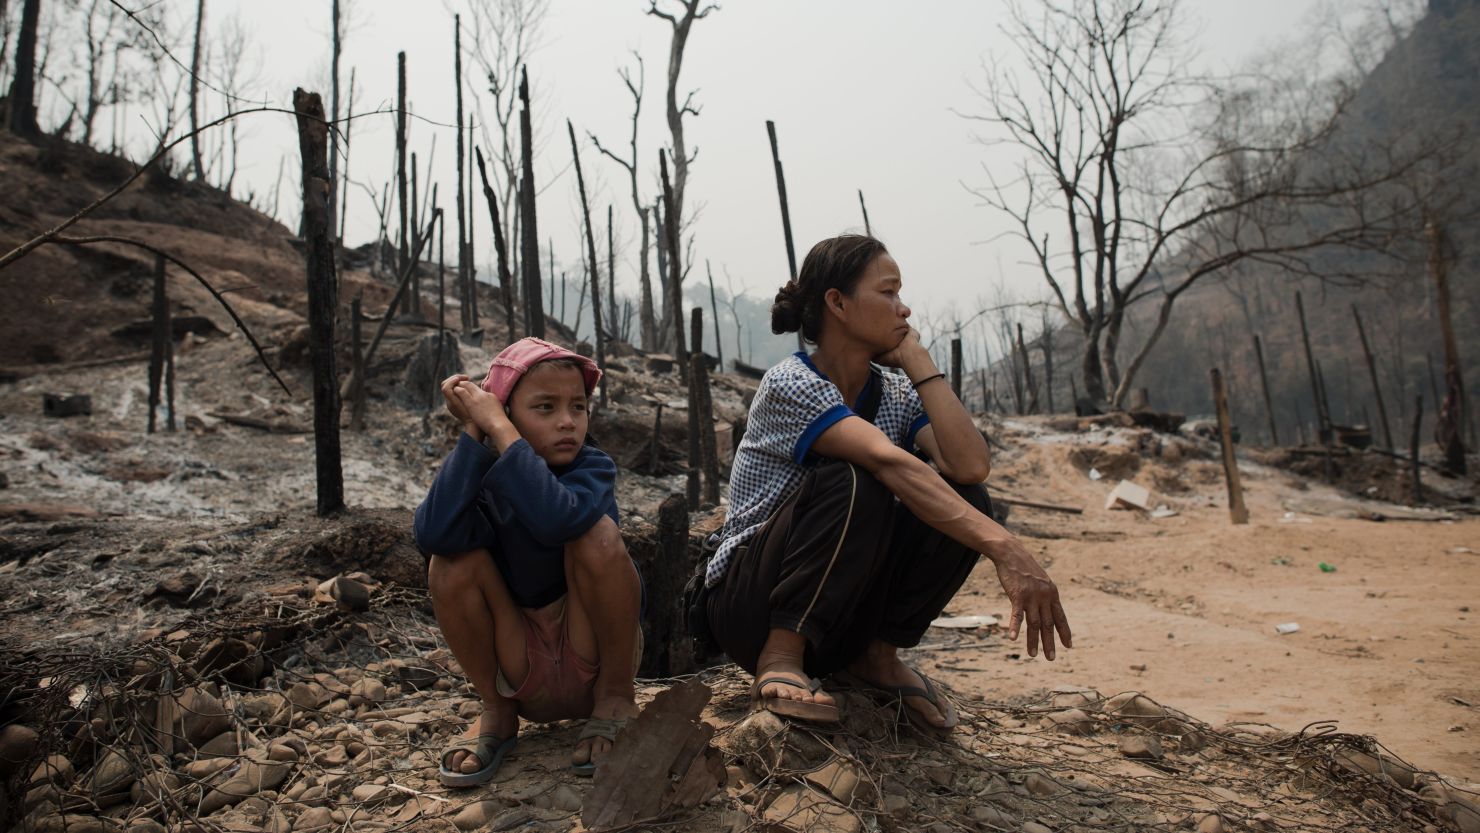 More than 100 people were injured in the fire, which destroyed about 400 homes at the Mae Surin camp.